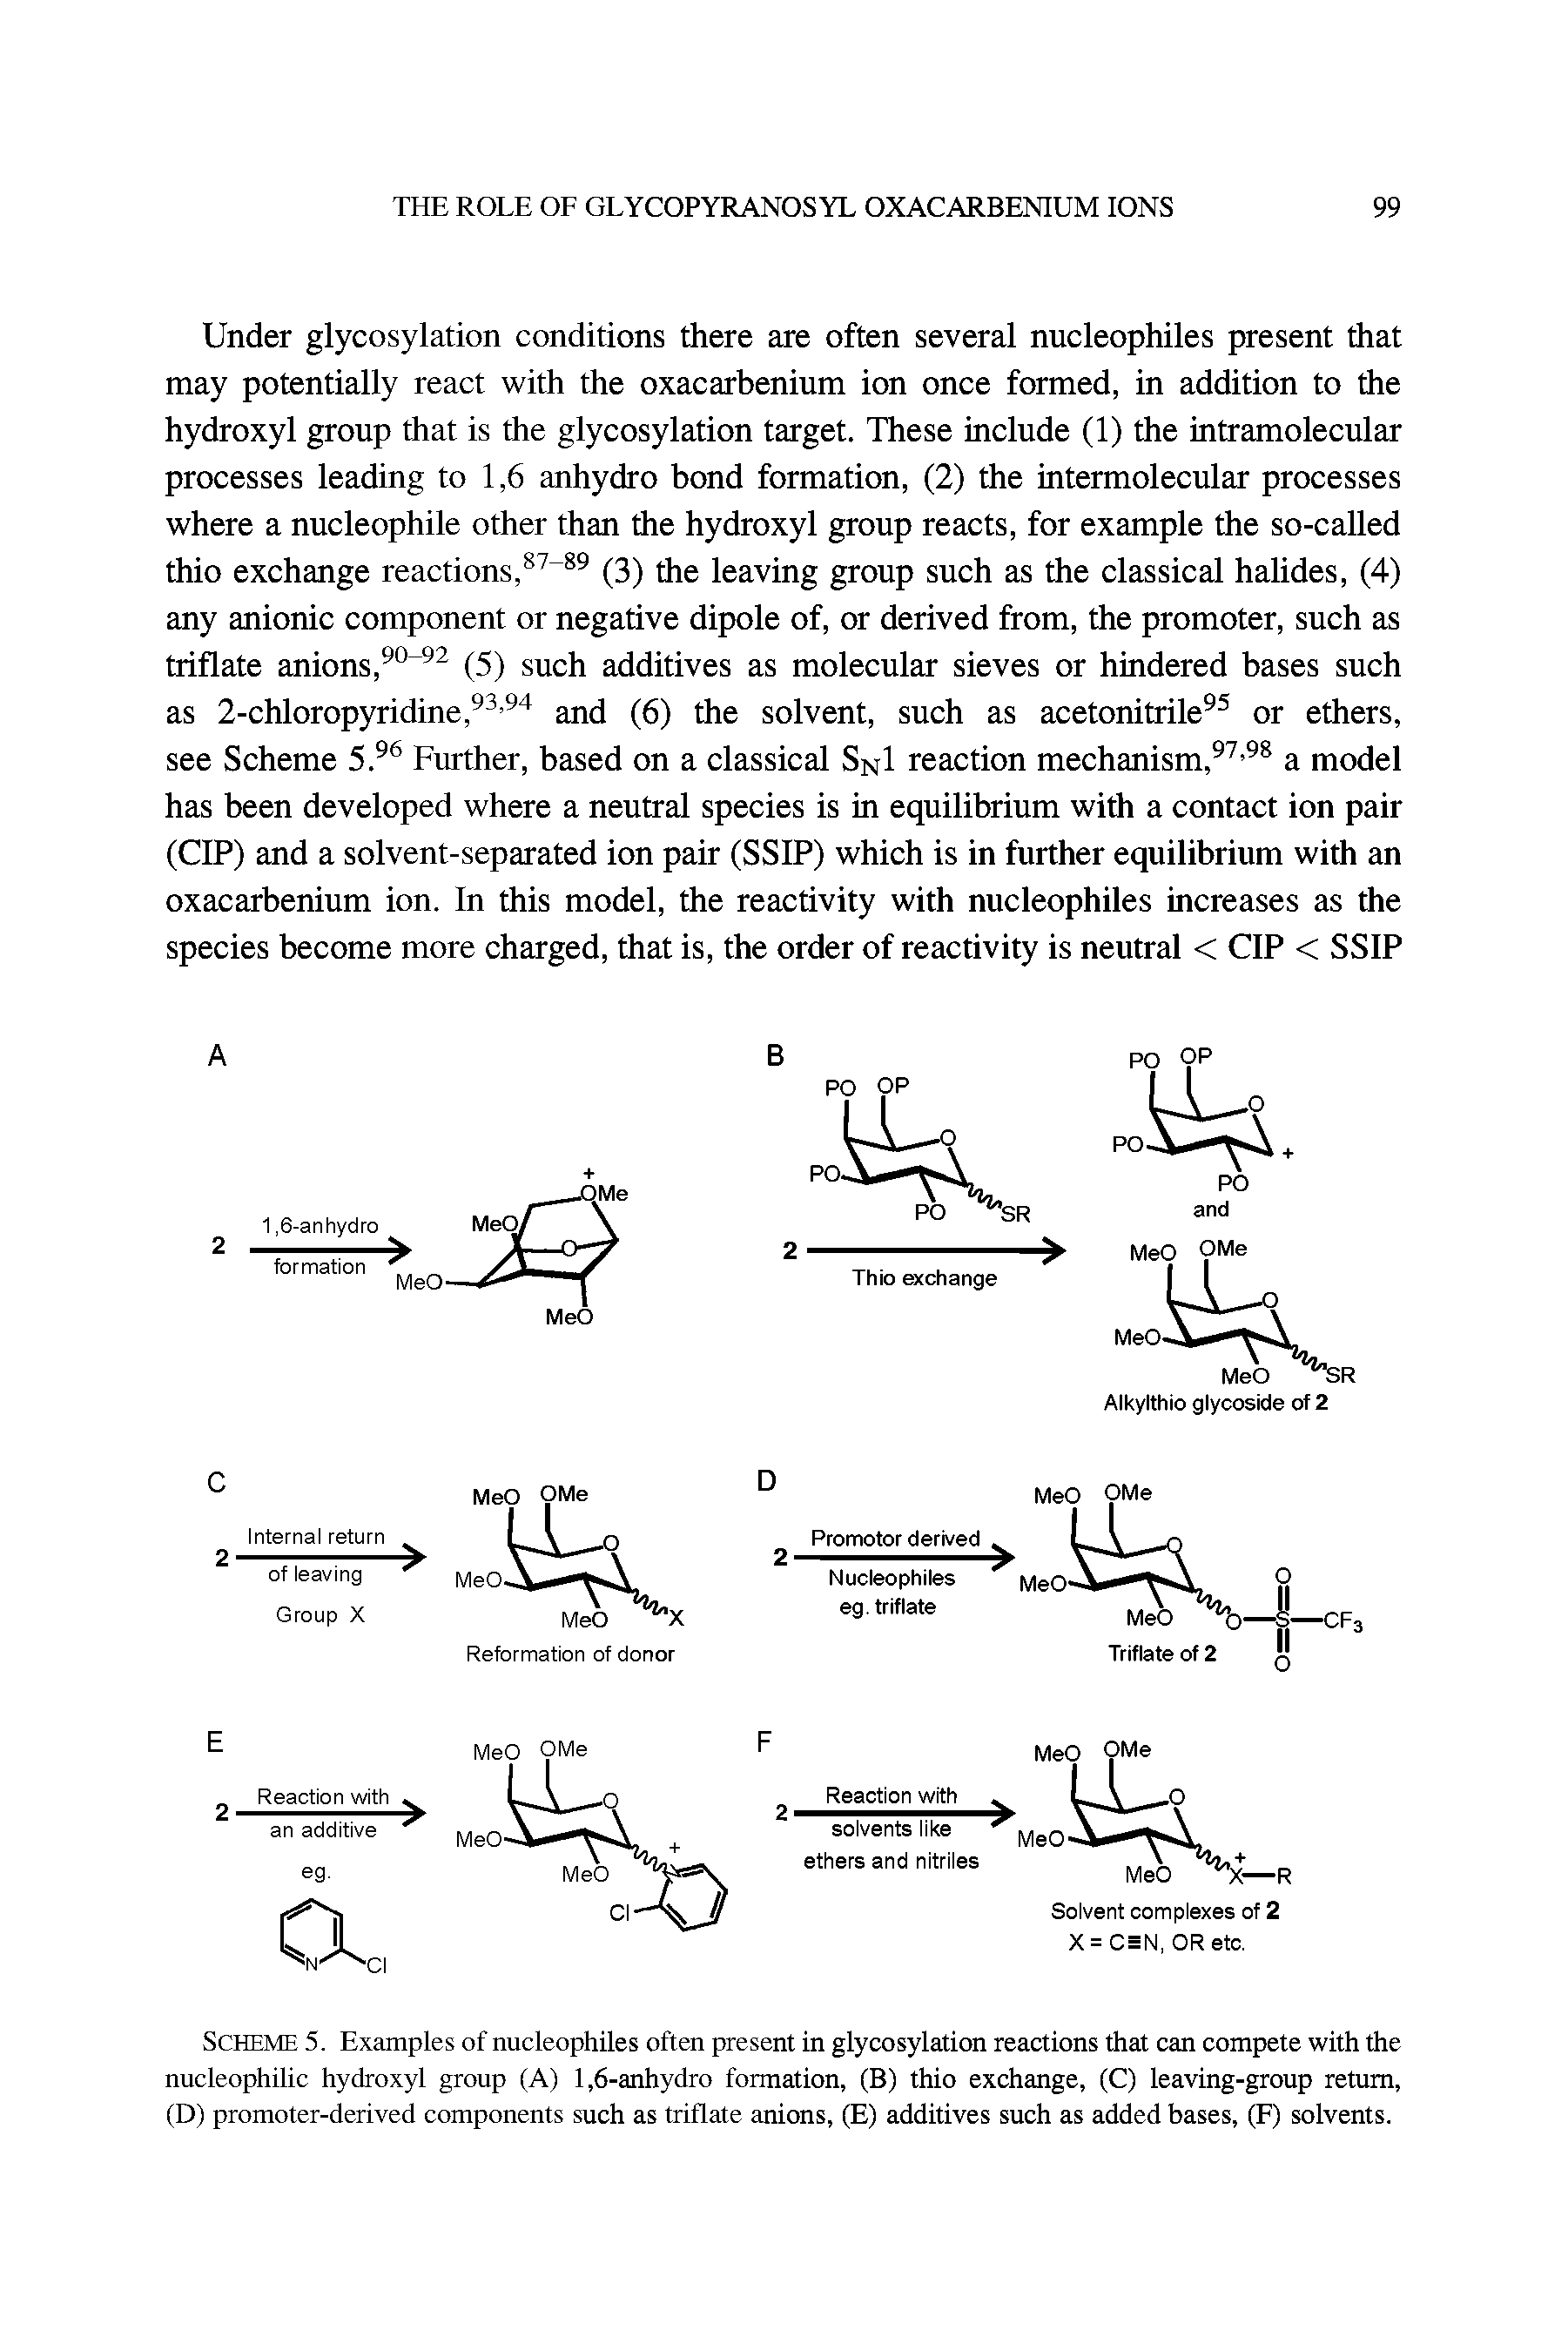 Scheme 5. Examples of nucleophiles often present in glycosylation reactions that can compete with the nucleophilic hydroxyl group (A) 1,6-anhydro formation, (B) thio exchange, (C) leaving-group return, (D) promoter-derived components such as triflate anions, (E) additives such as added bases, (F) solvents.